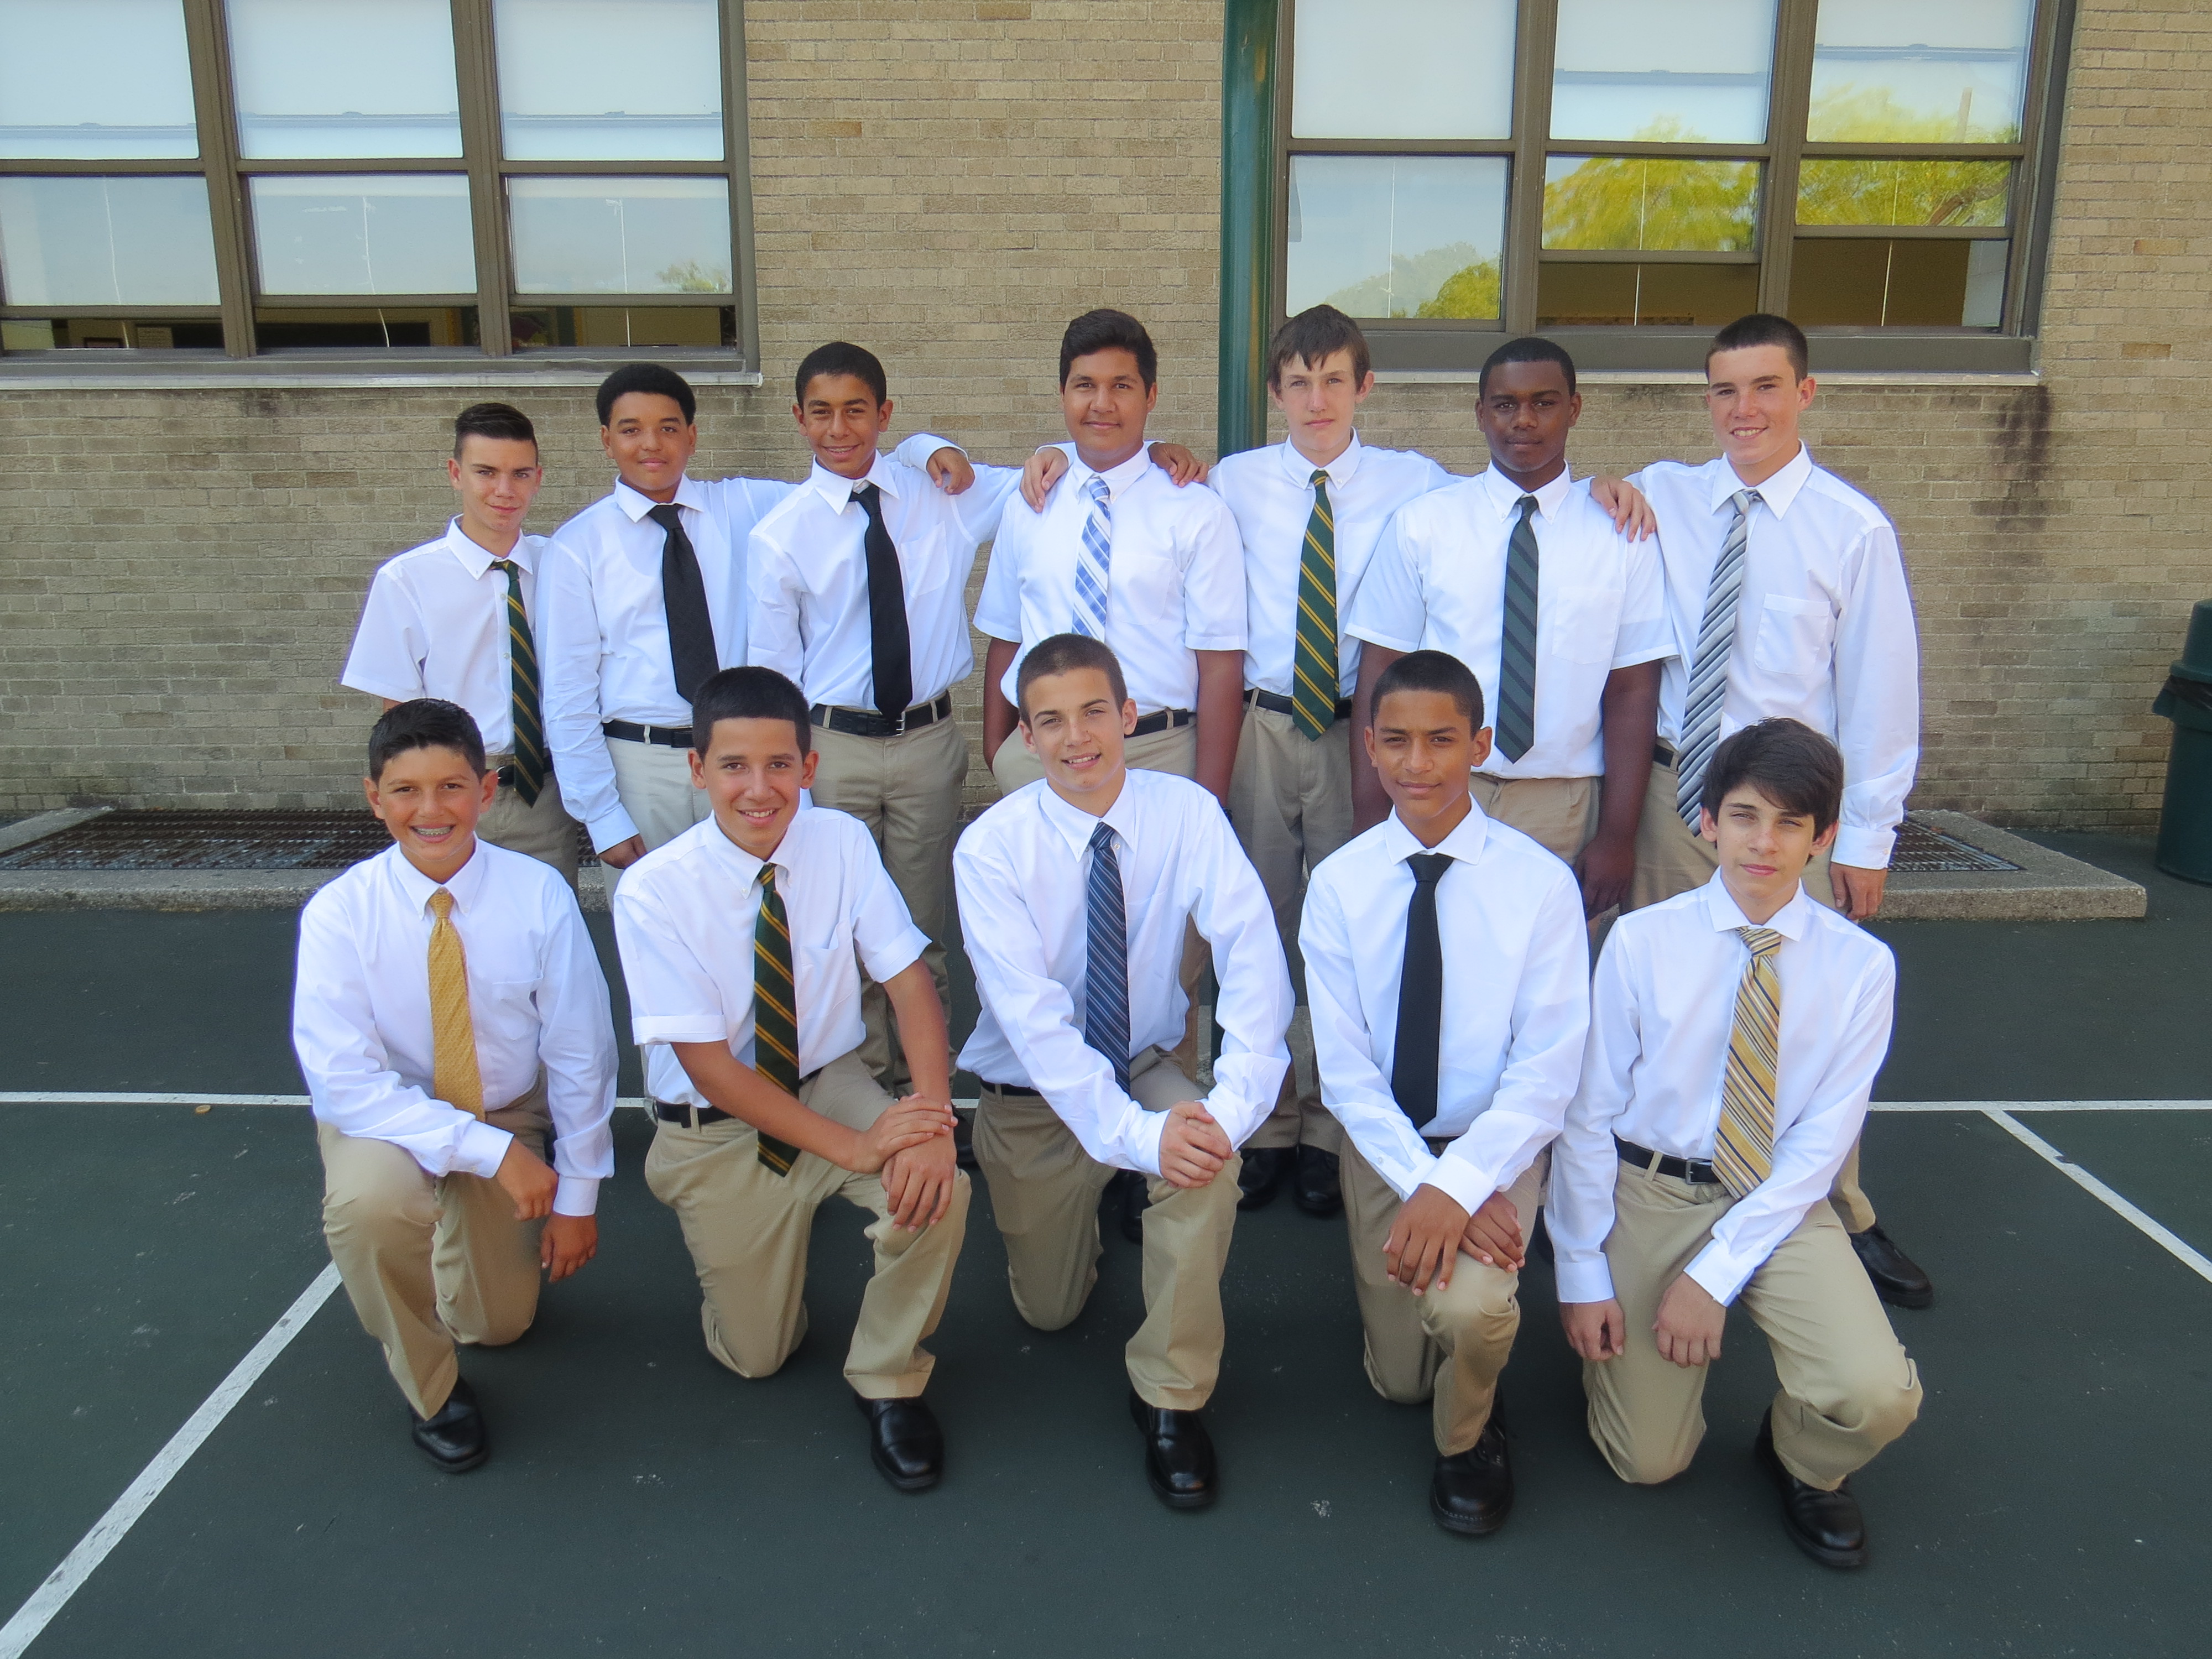 Holy Cross freshmen get acquainted at Orientation Day. Standing from left are Christopher Georgiadis, Tyler Lawson, Hassan Hassan, Christopher Goris, Joseph Higgins, Christian Mason and Thomas Leuthner; kneeling, from left are Achilleas Karangunis, Christian Mateo, Nicholas Forgione, Nicholas Gutierez and Christopher Kyriacou. 